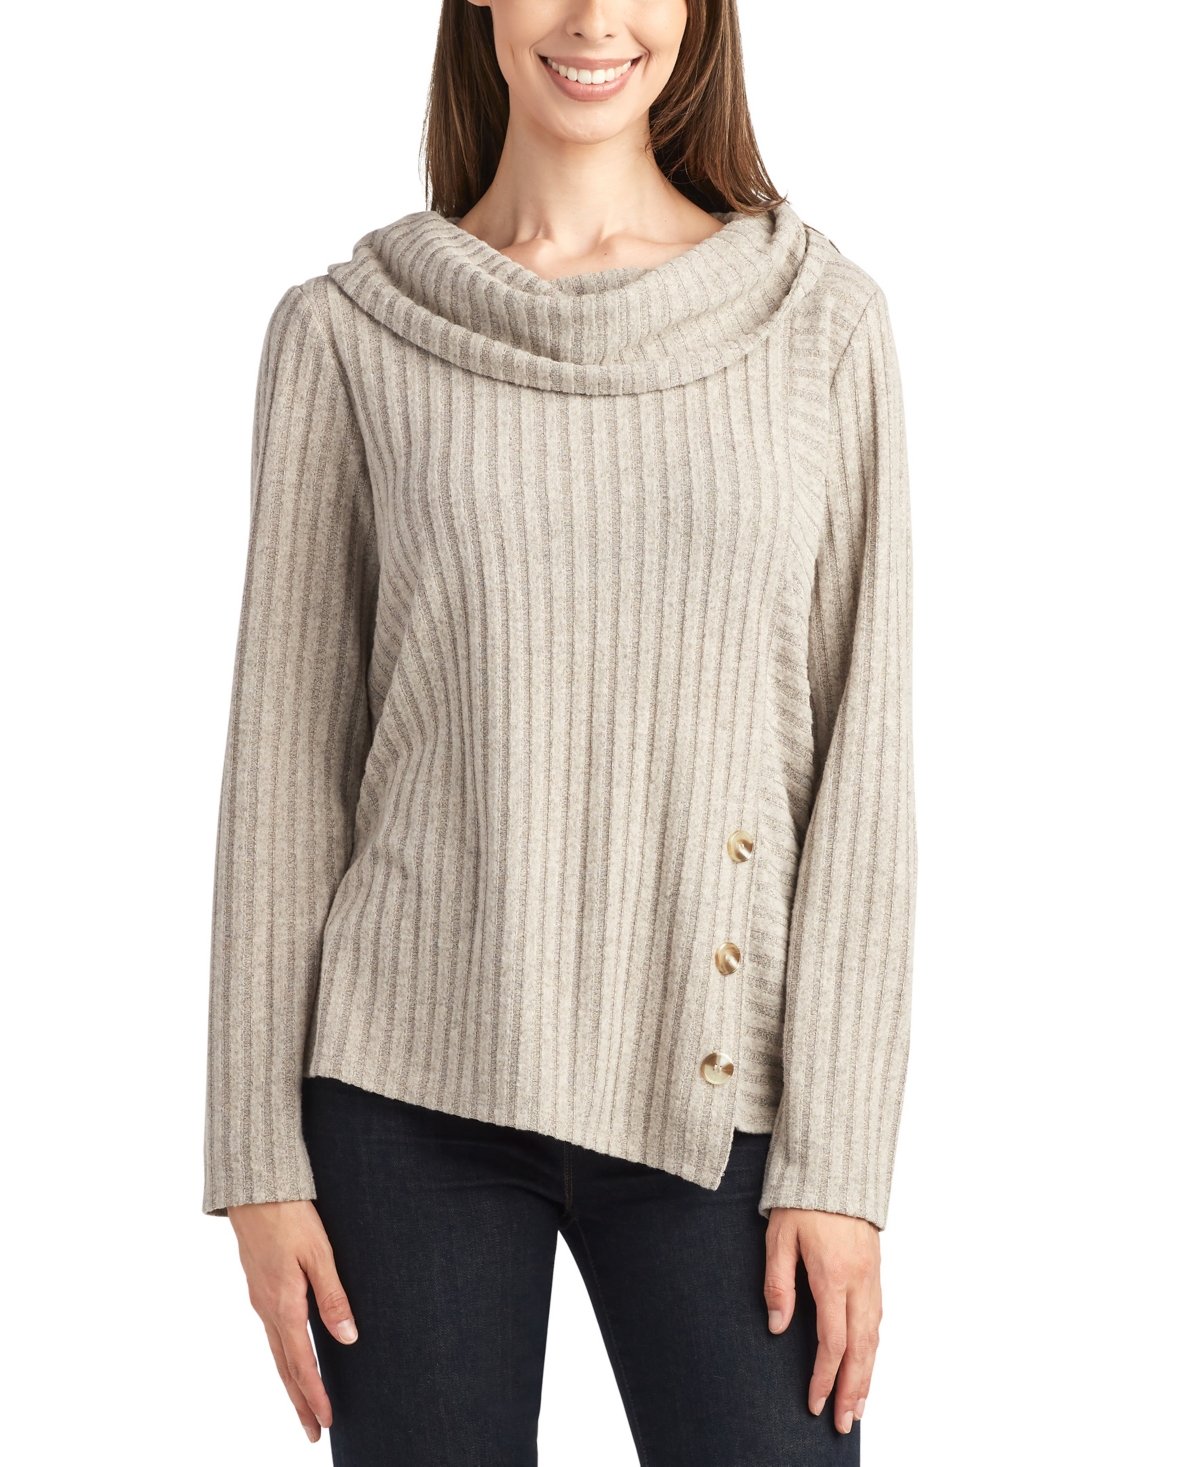 Juniors' Cowlneck Button-Trimmed Ribbed Sweater - Sparkling